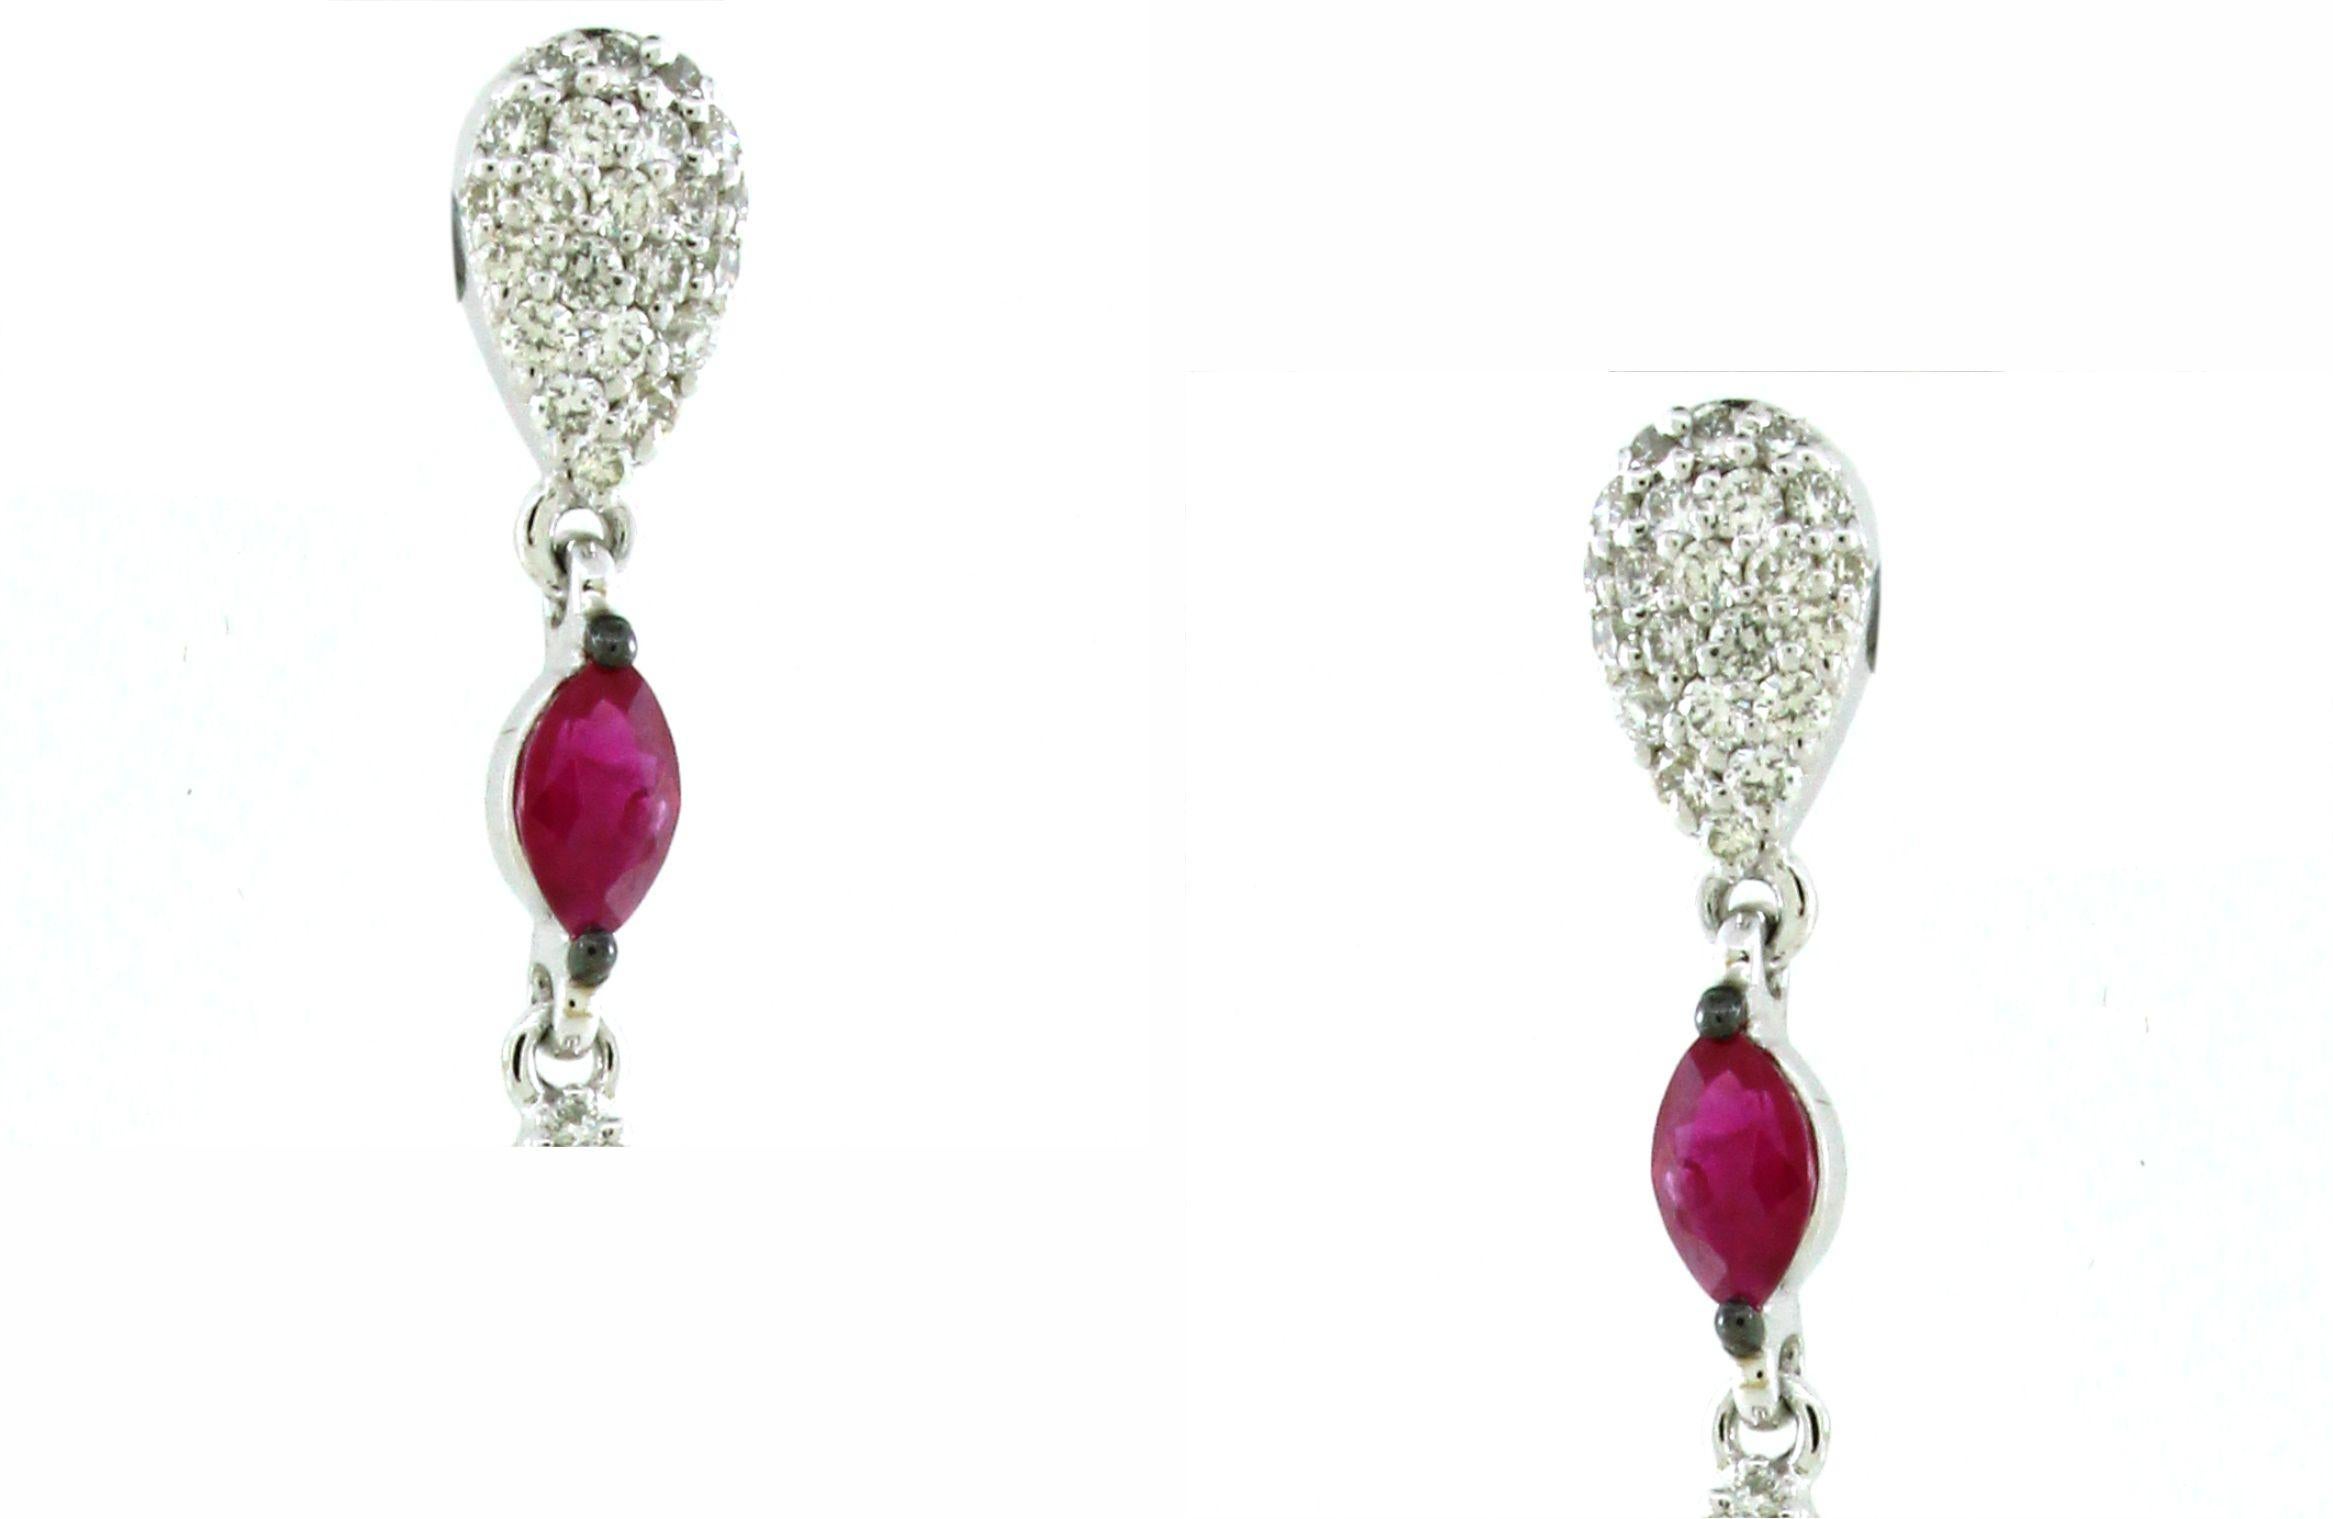 Introducing our exquisite Ruby Drop Statement Earrings, meticulously crafted in opulent 18K white gold, weighing a total of 9.66 grams. These captivating earrings boast a magnificent display of rubies, featuring two round rubies totaling 4.8 carats